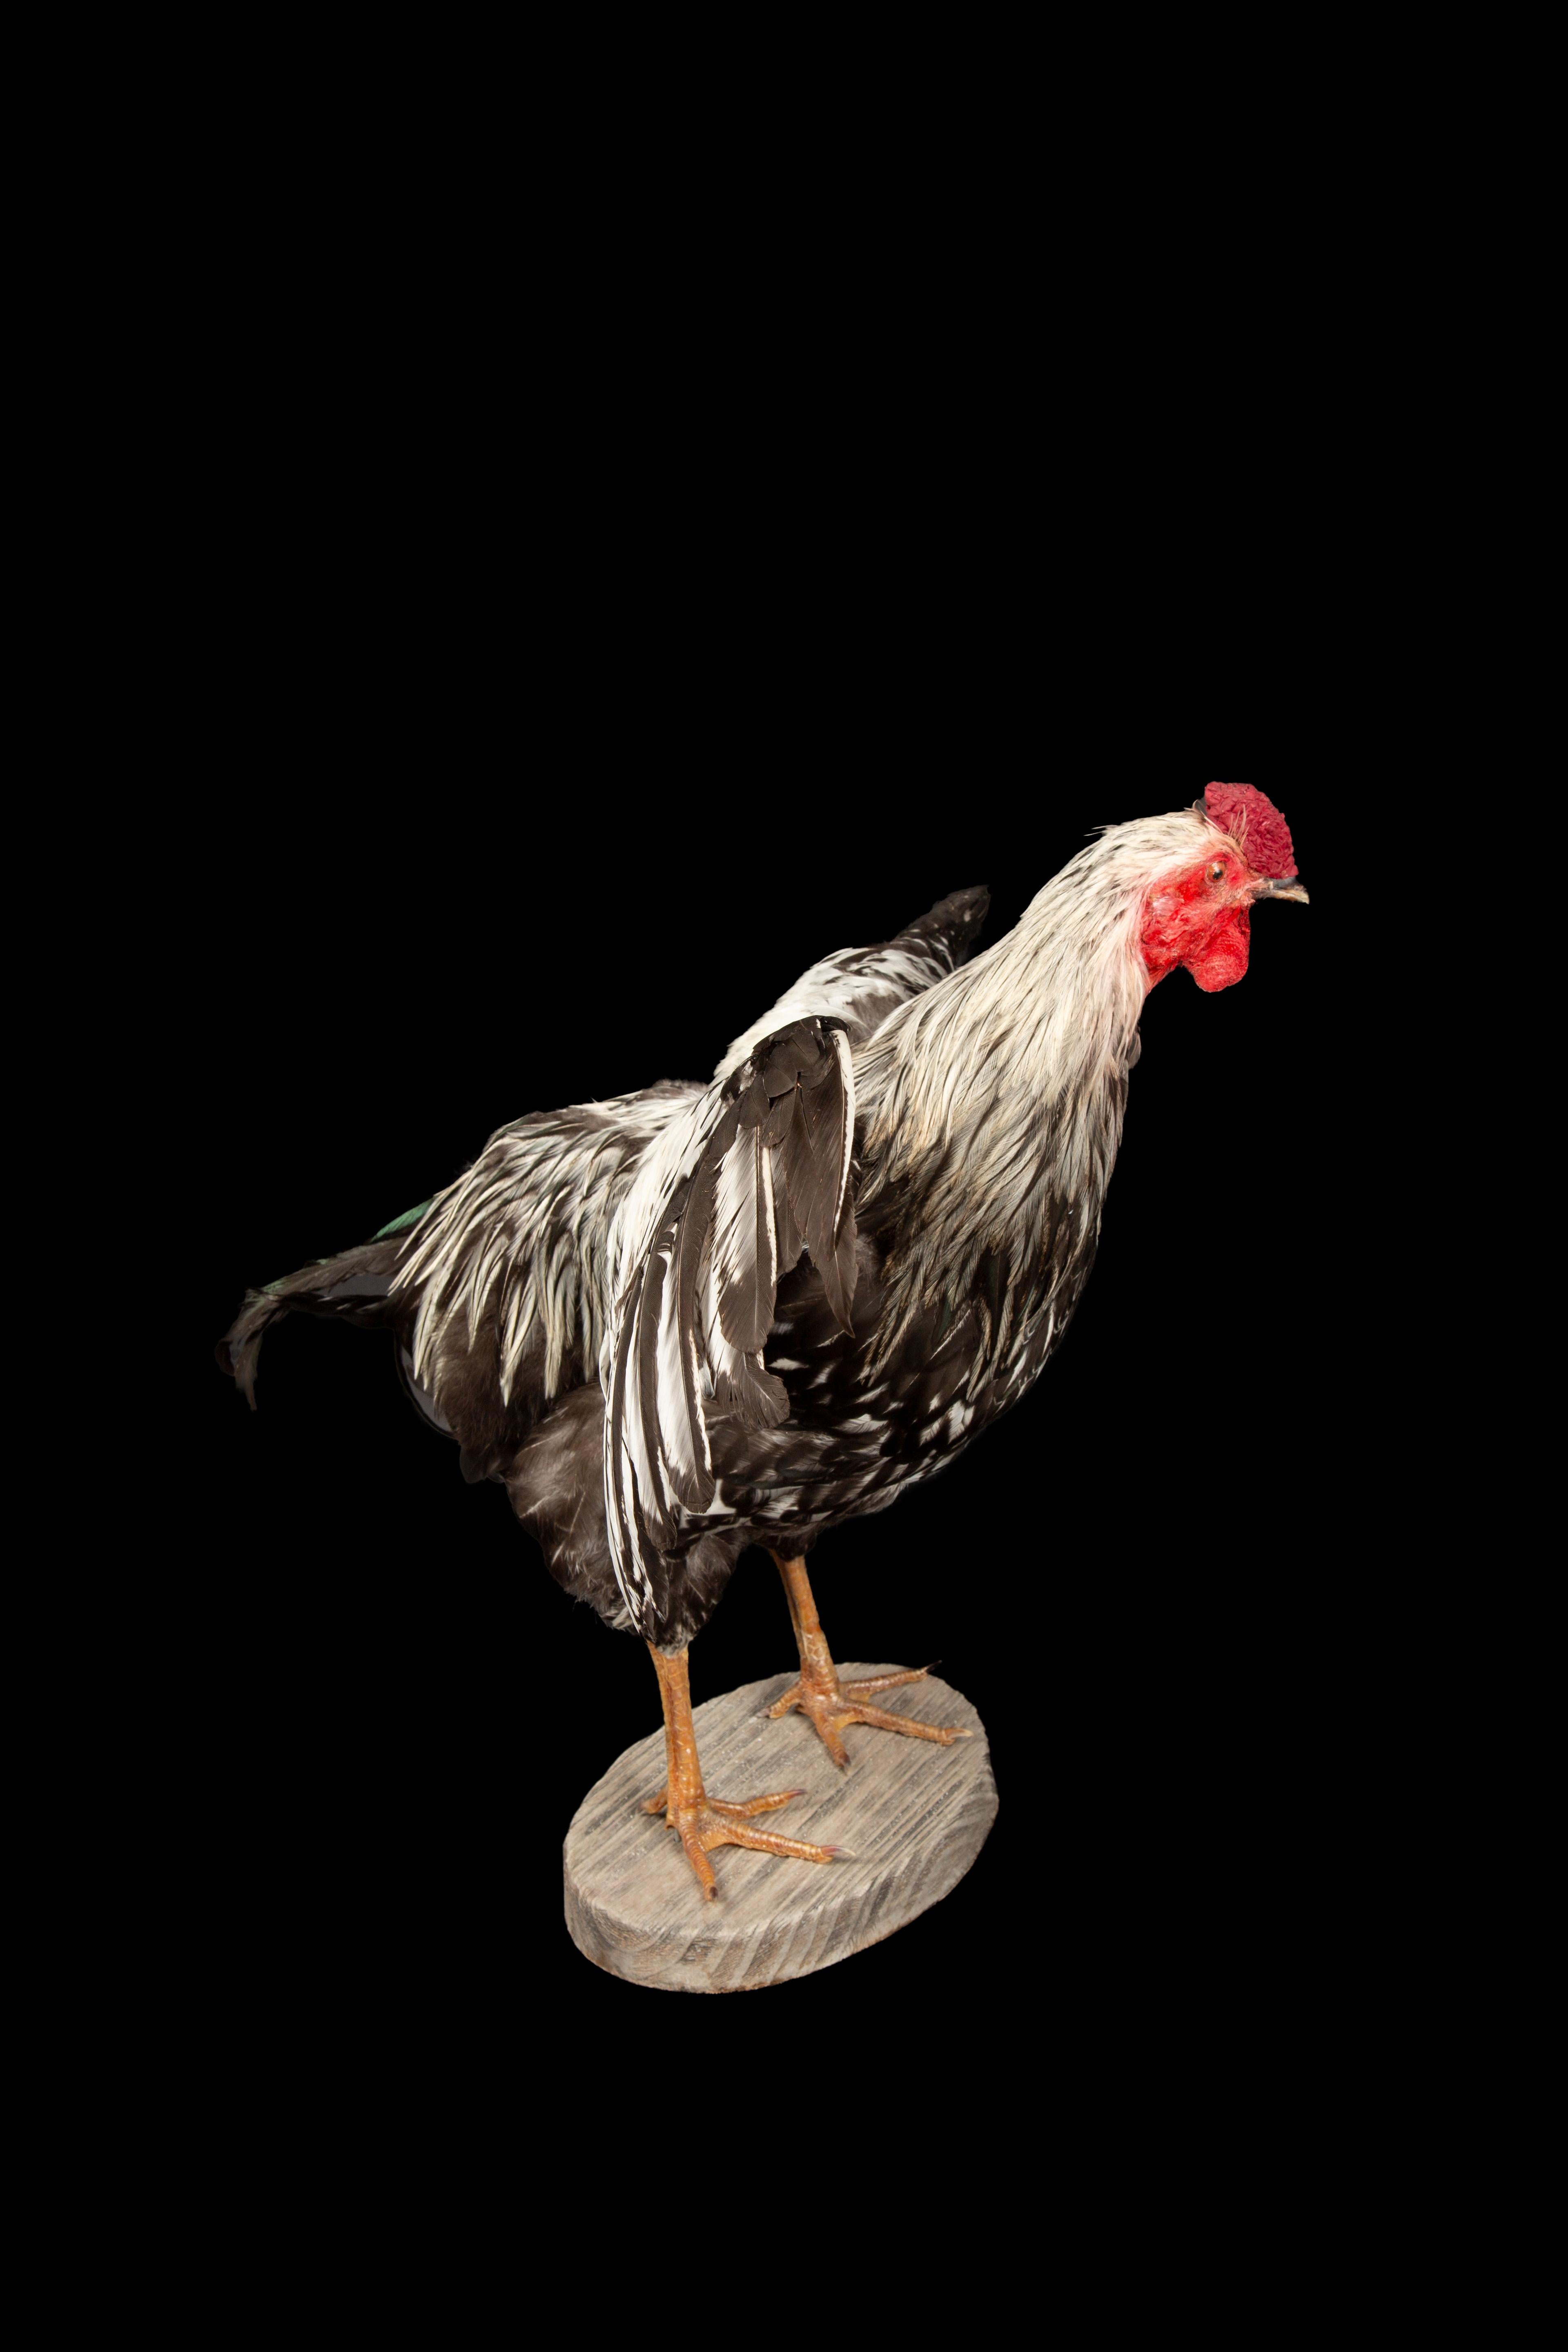 Feathers Celebrate American Poultry with this Taxidermy Silver Laced Wyandotte Rooster For Sale